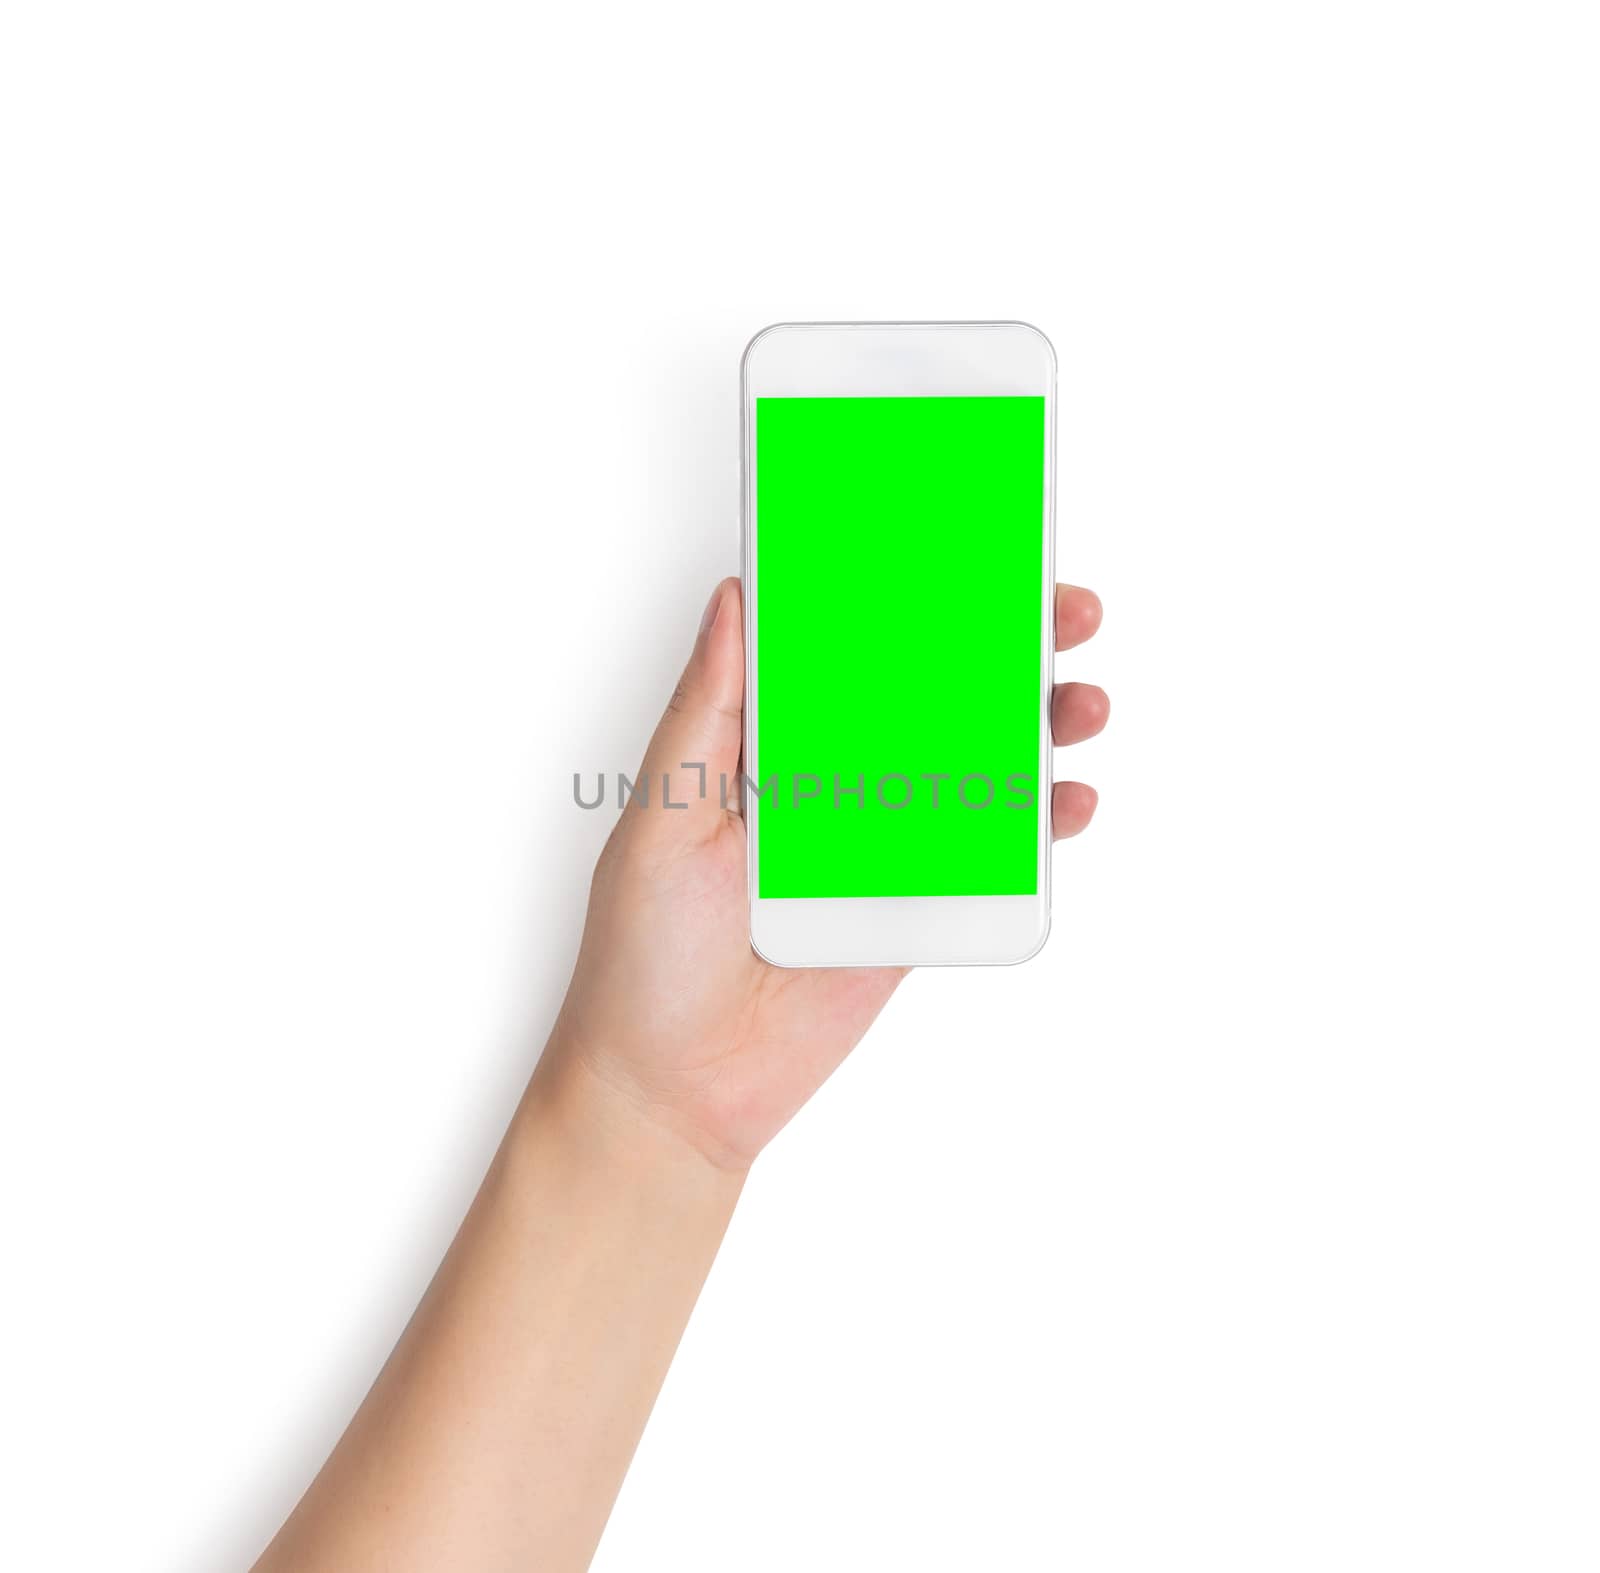 hand holding white mobile smart phone with blank green screen isolated on white background with clipping path on green screen and background, studio shot by asiandelight